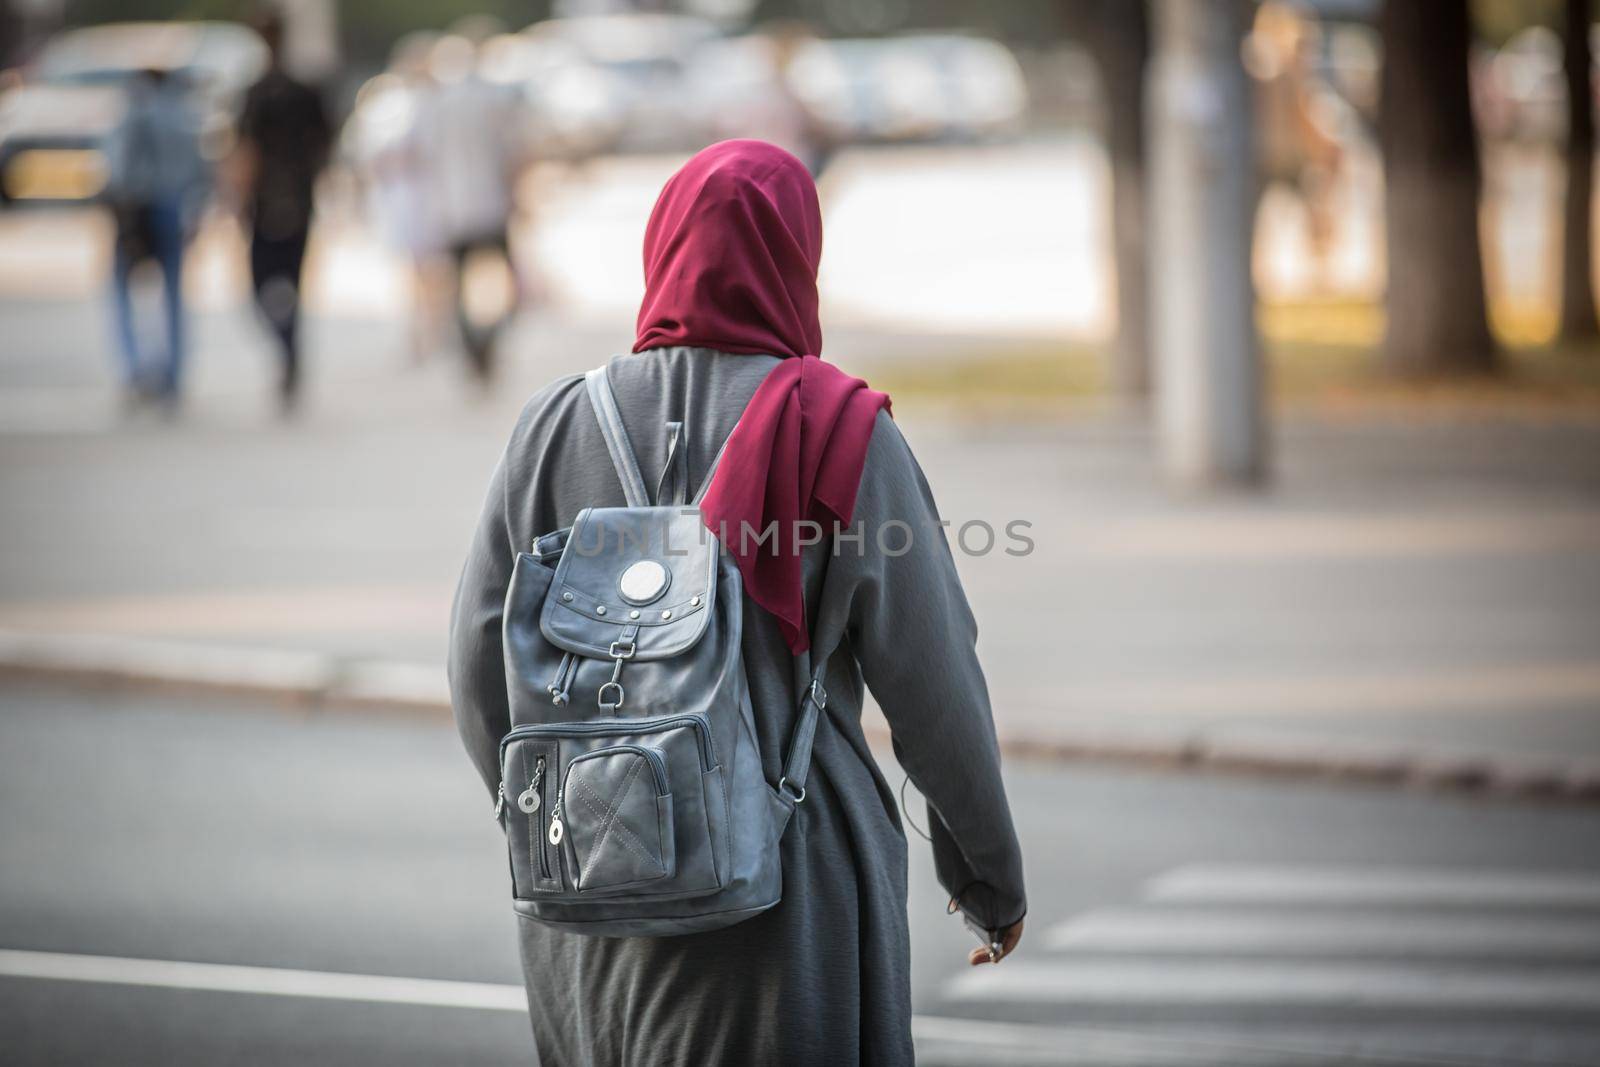 Ukraine. Kharkiv city September 10, 2019. A student from an Arab country walks in a European city. by Yurii73